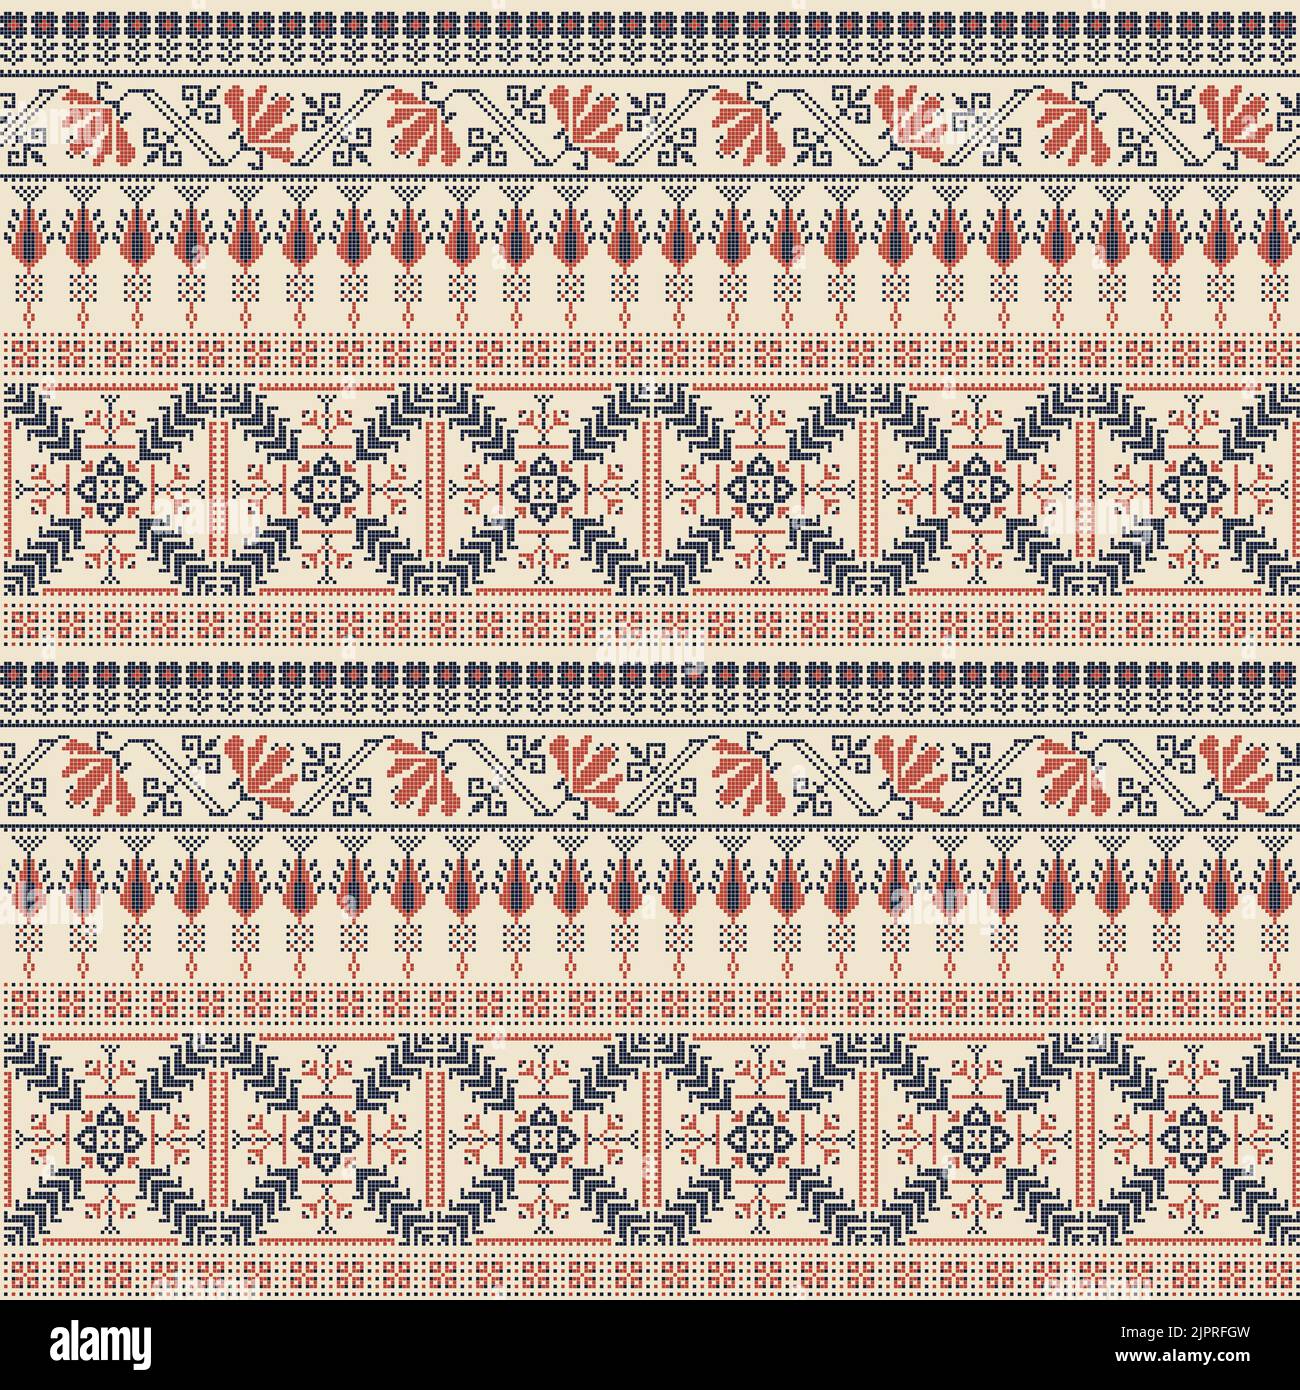 Seamless pattern design with traditional Palestinian embroidery motif Stock Photo